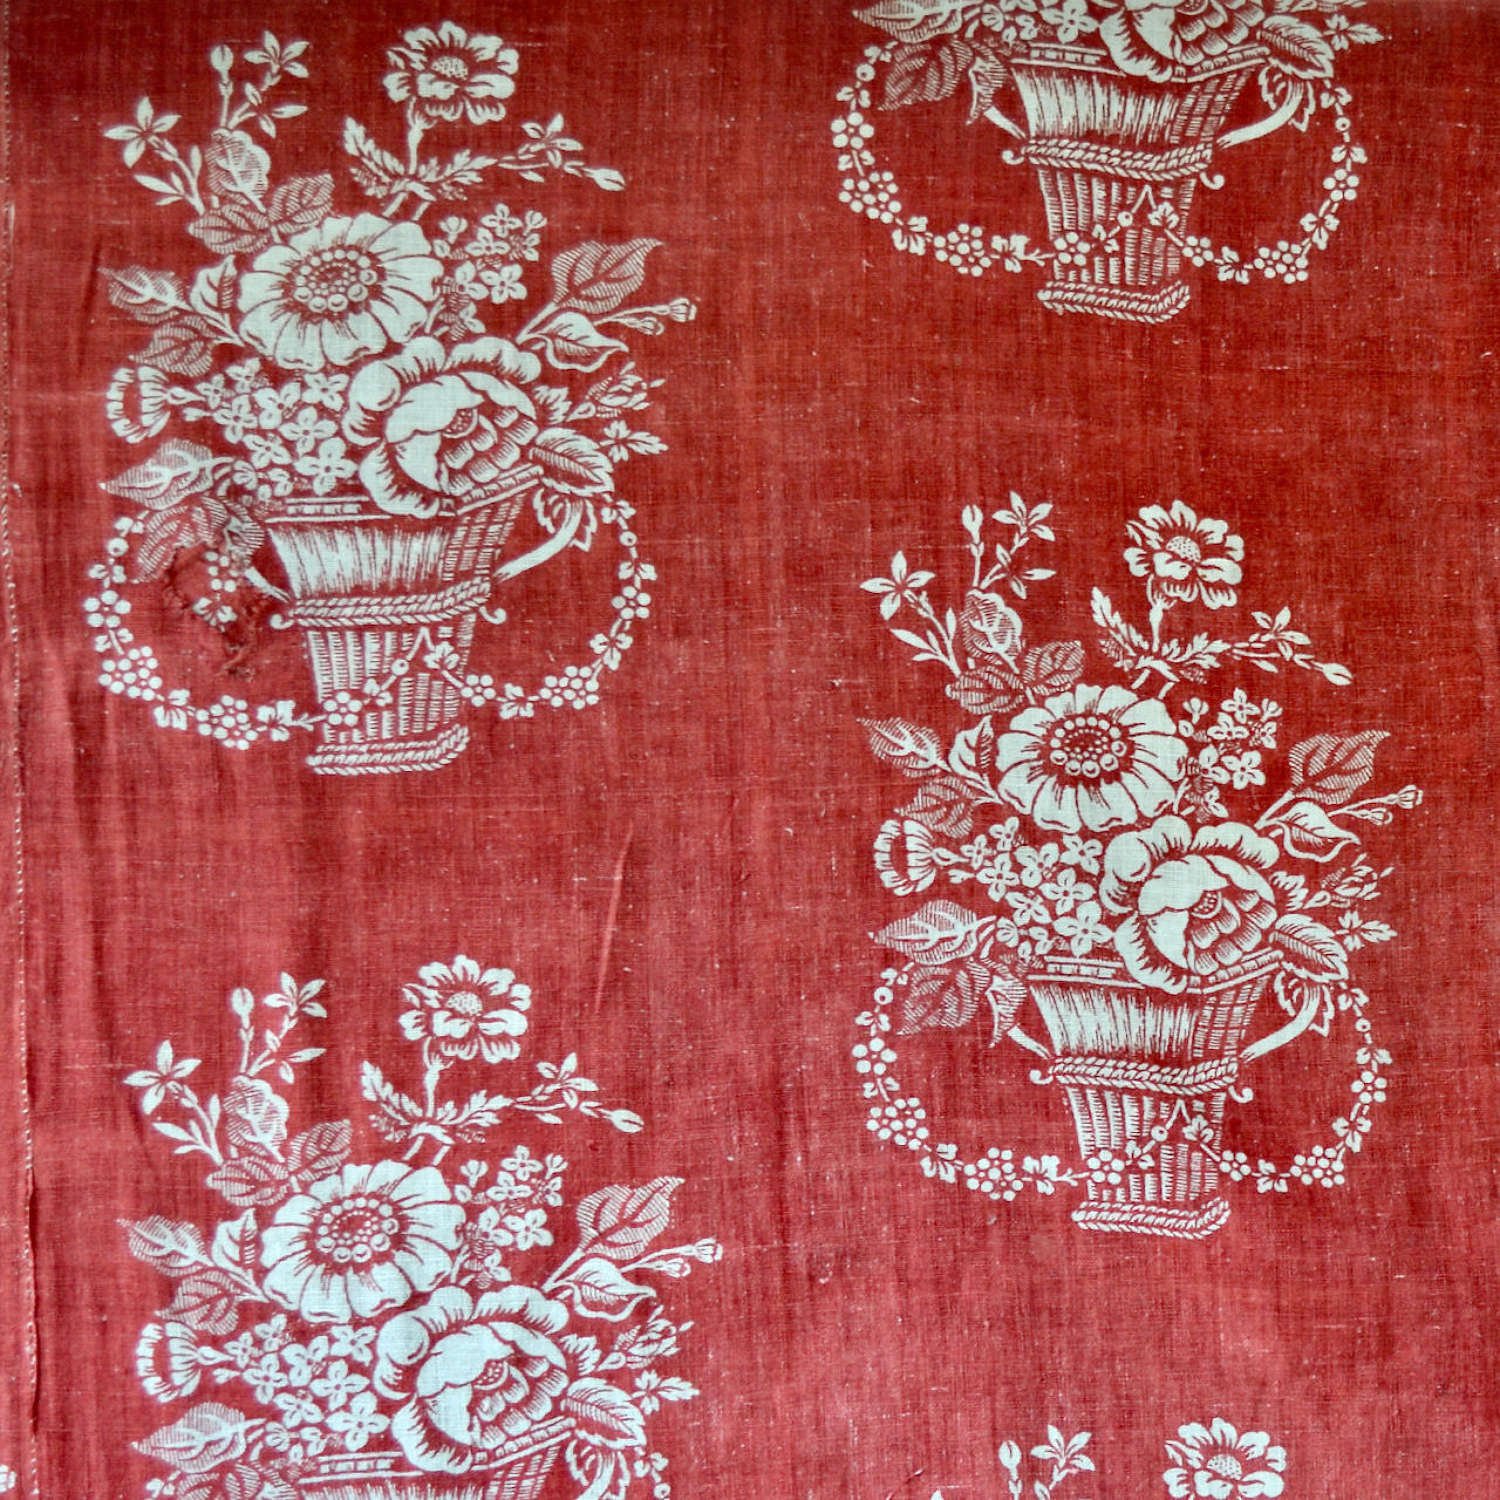 Madder Red Baskets of Flowers Textile French 18th Century